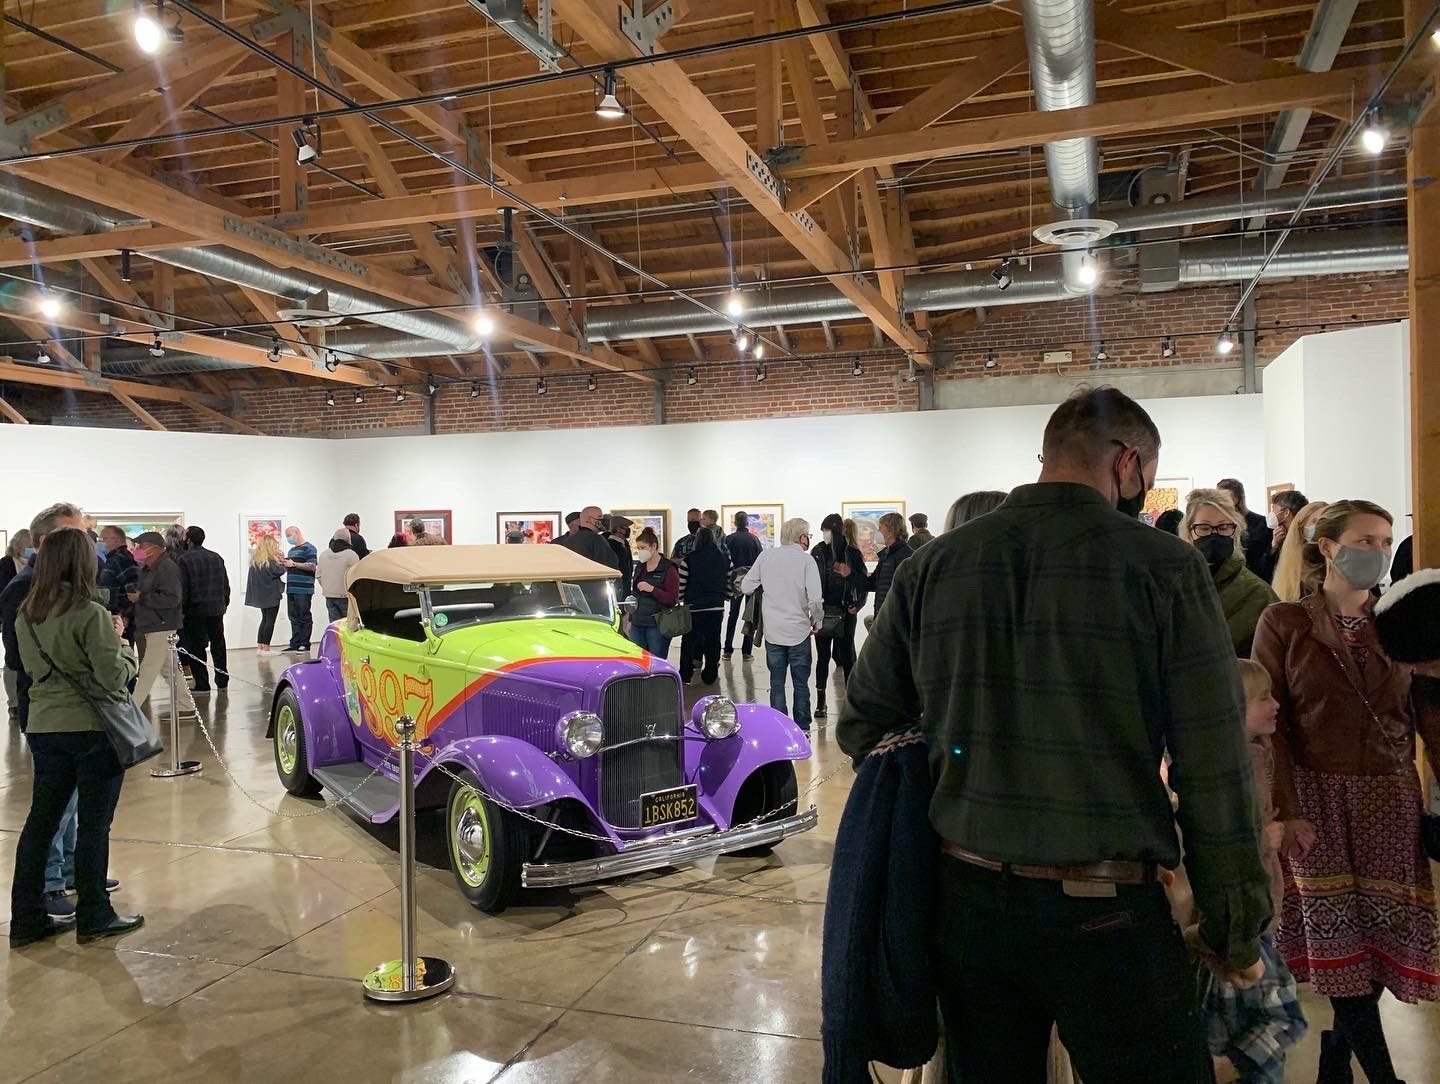 A picture of a group of people observing the artworks on the walk and a car with the colors yellow and purple in the center of the room